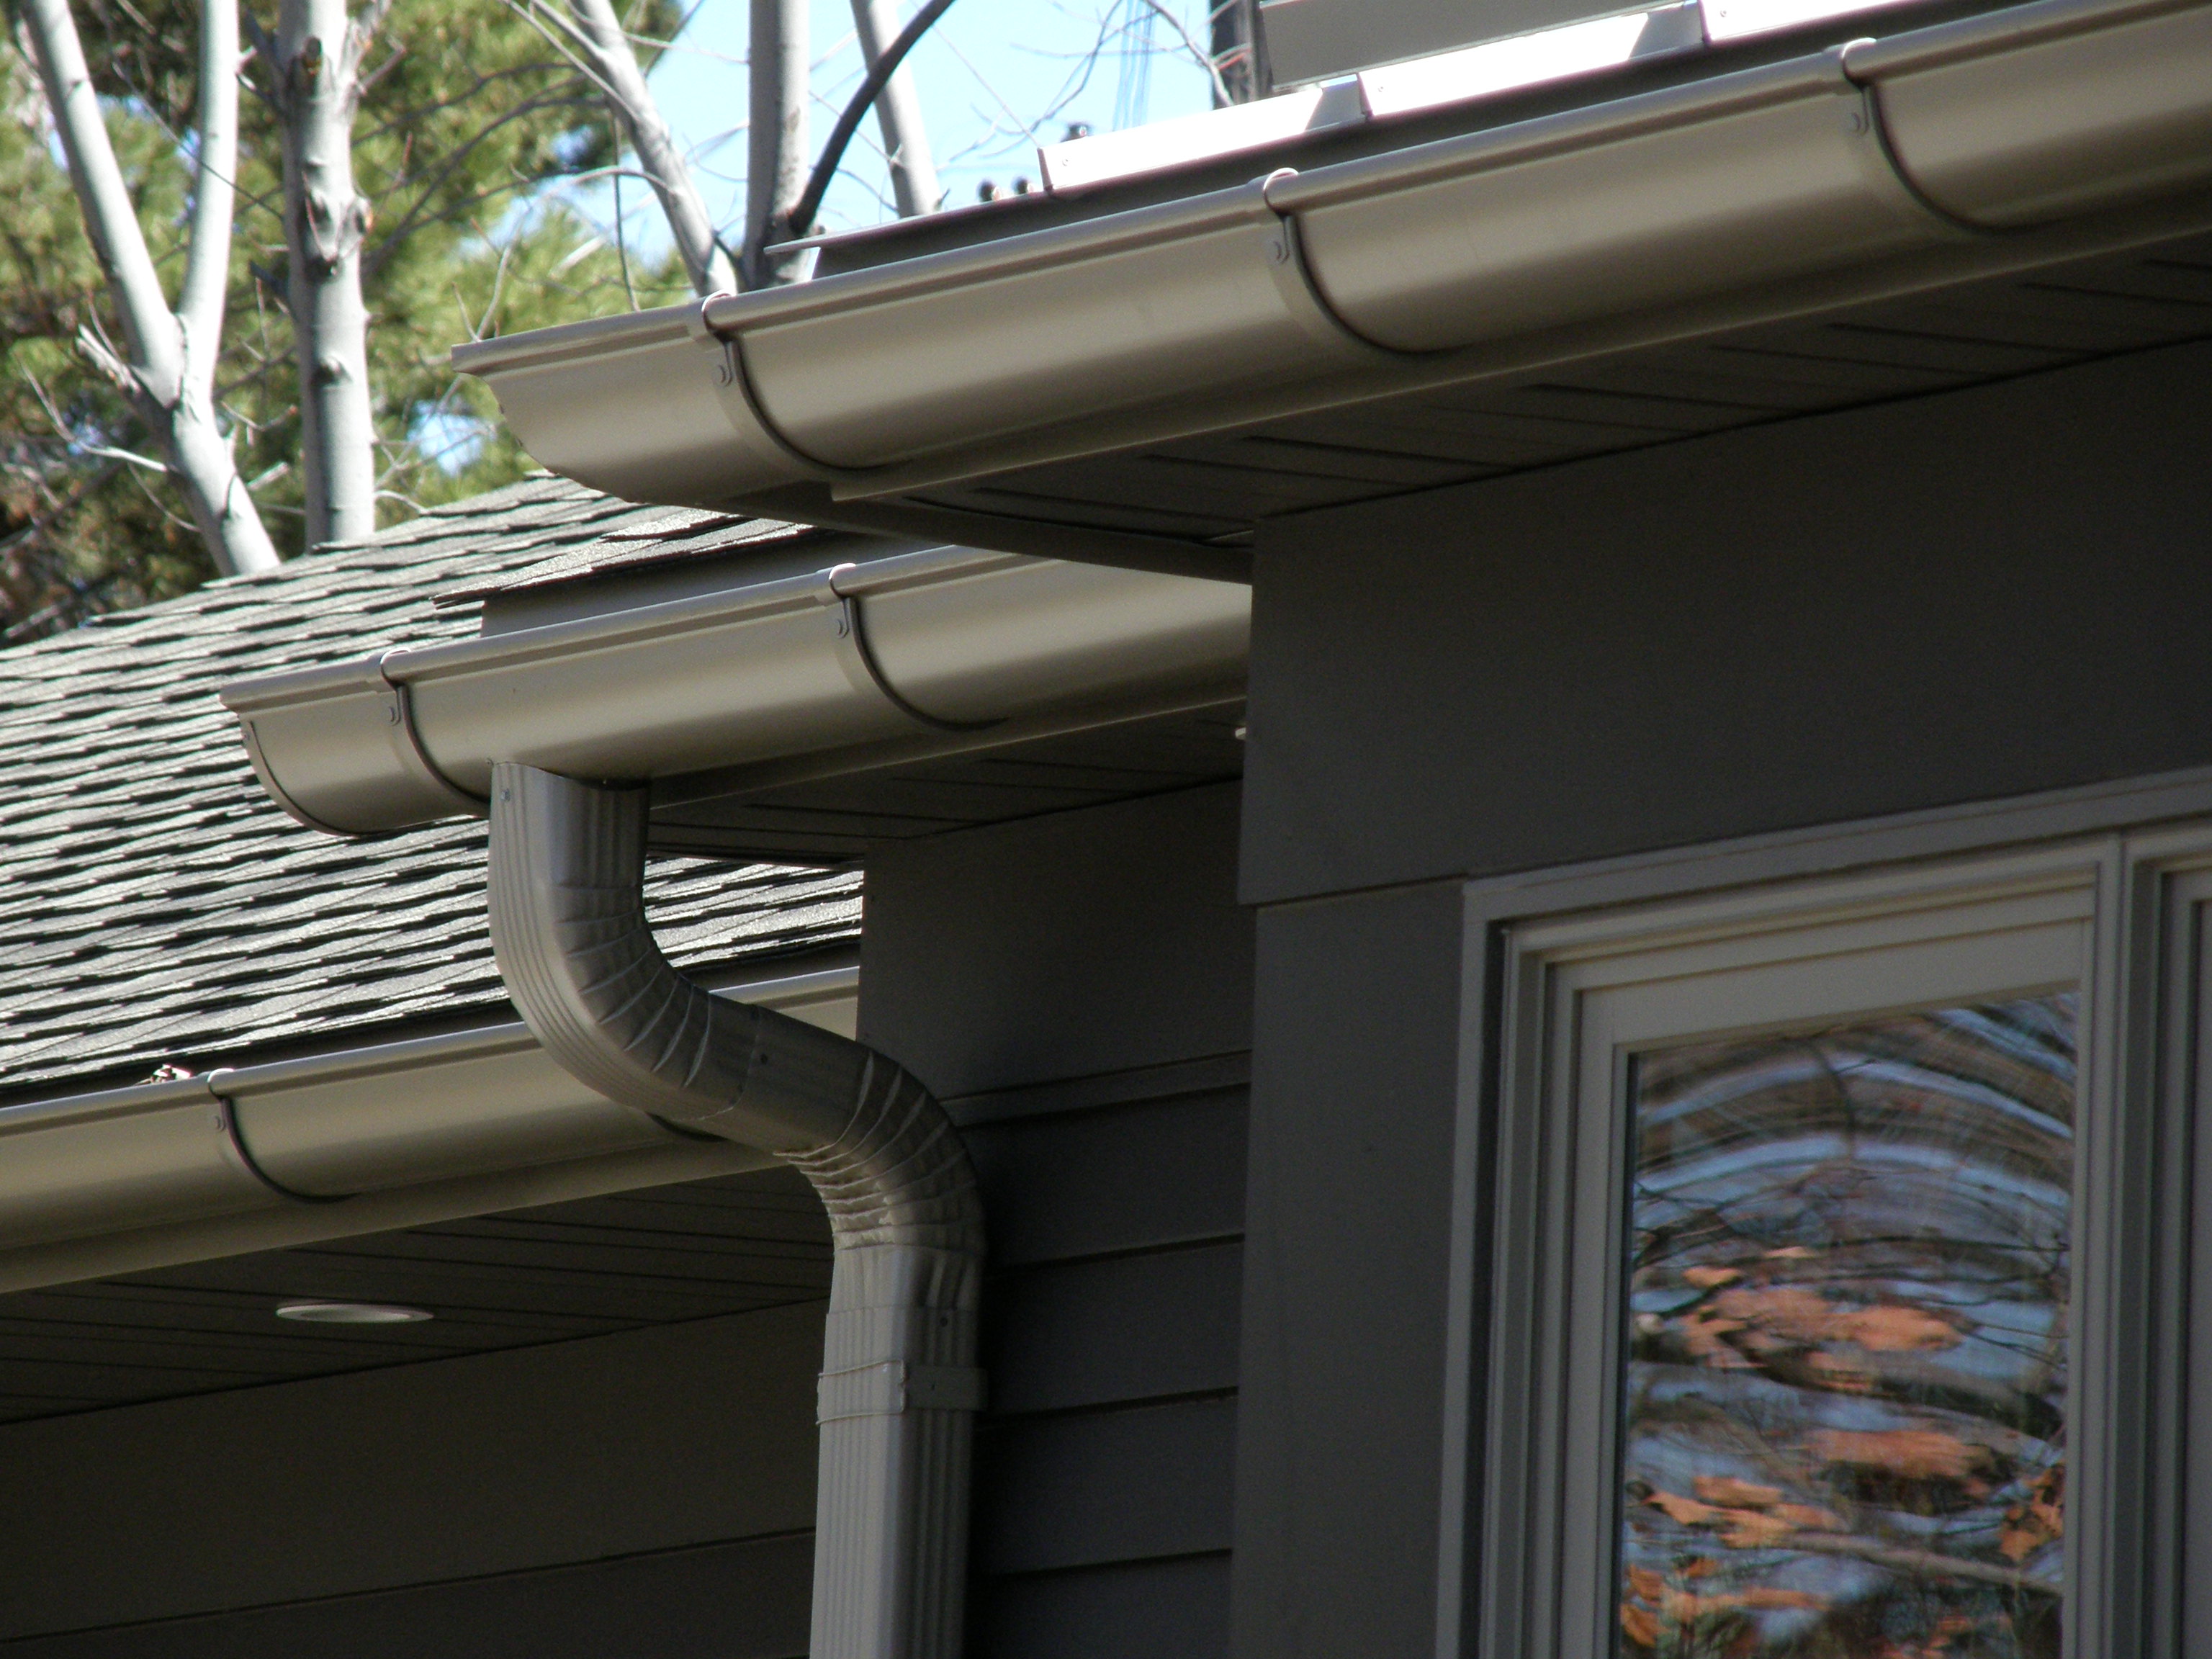 Mpls Half Round Gutter Installation, Half Round Gutters And Downspouts